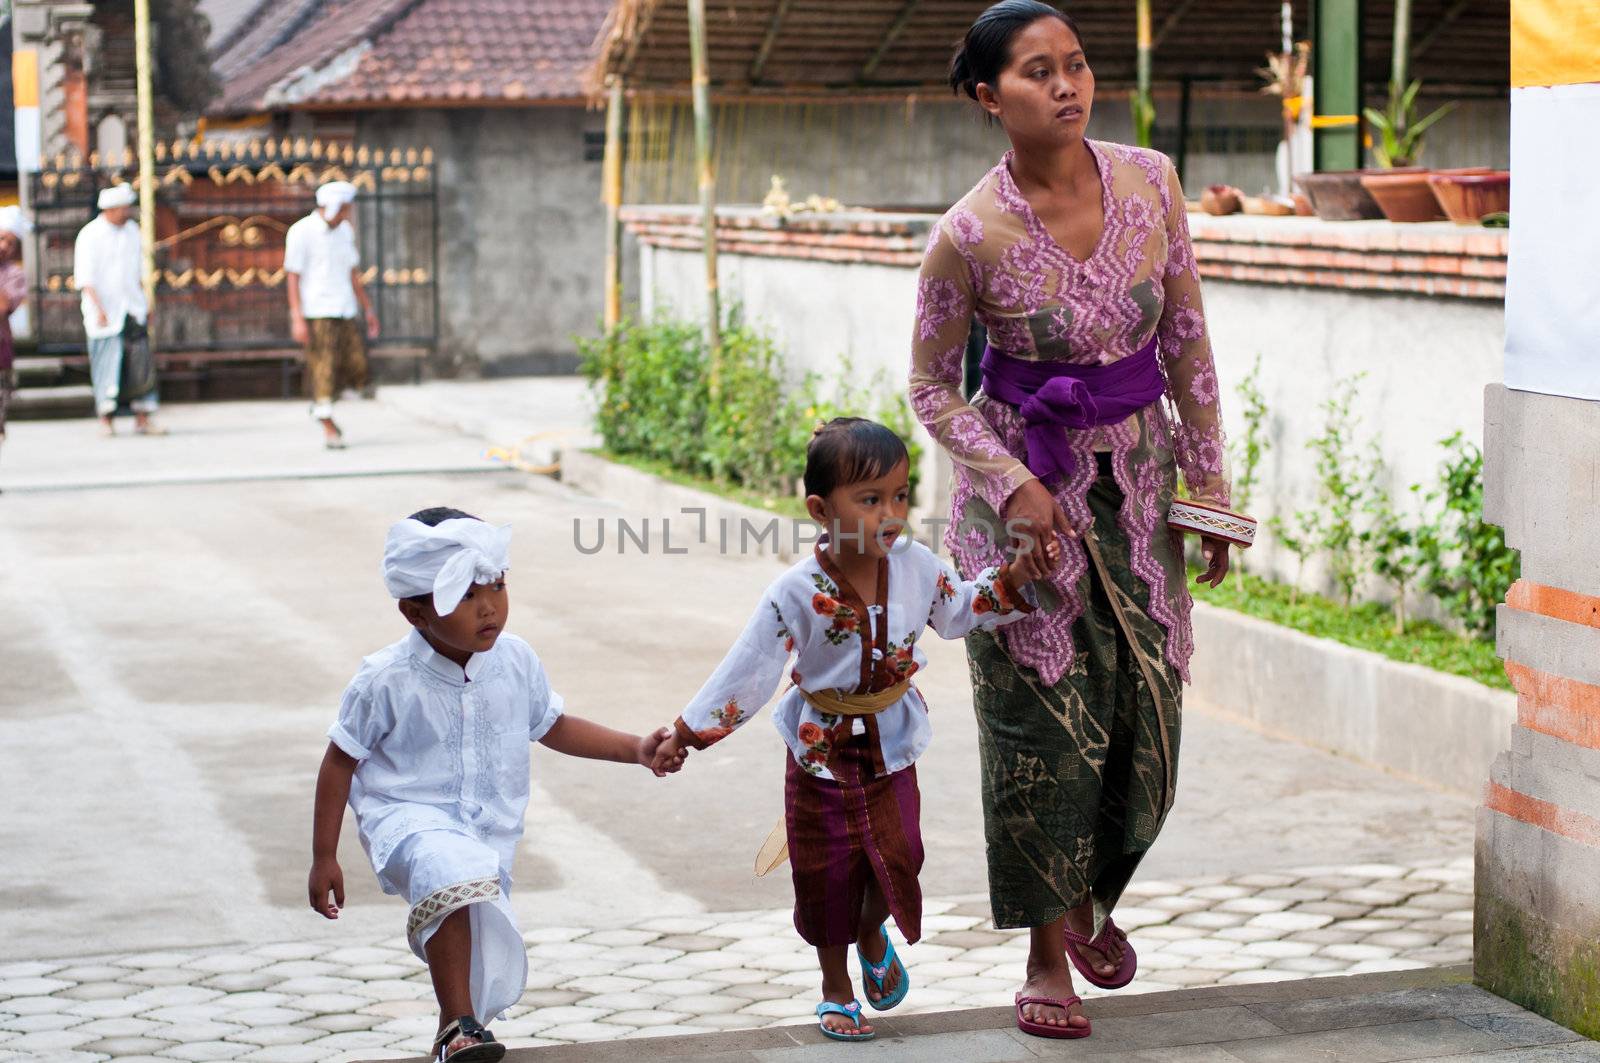 Balinese Woman With Children In Tirta Empul by nvelichko